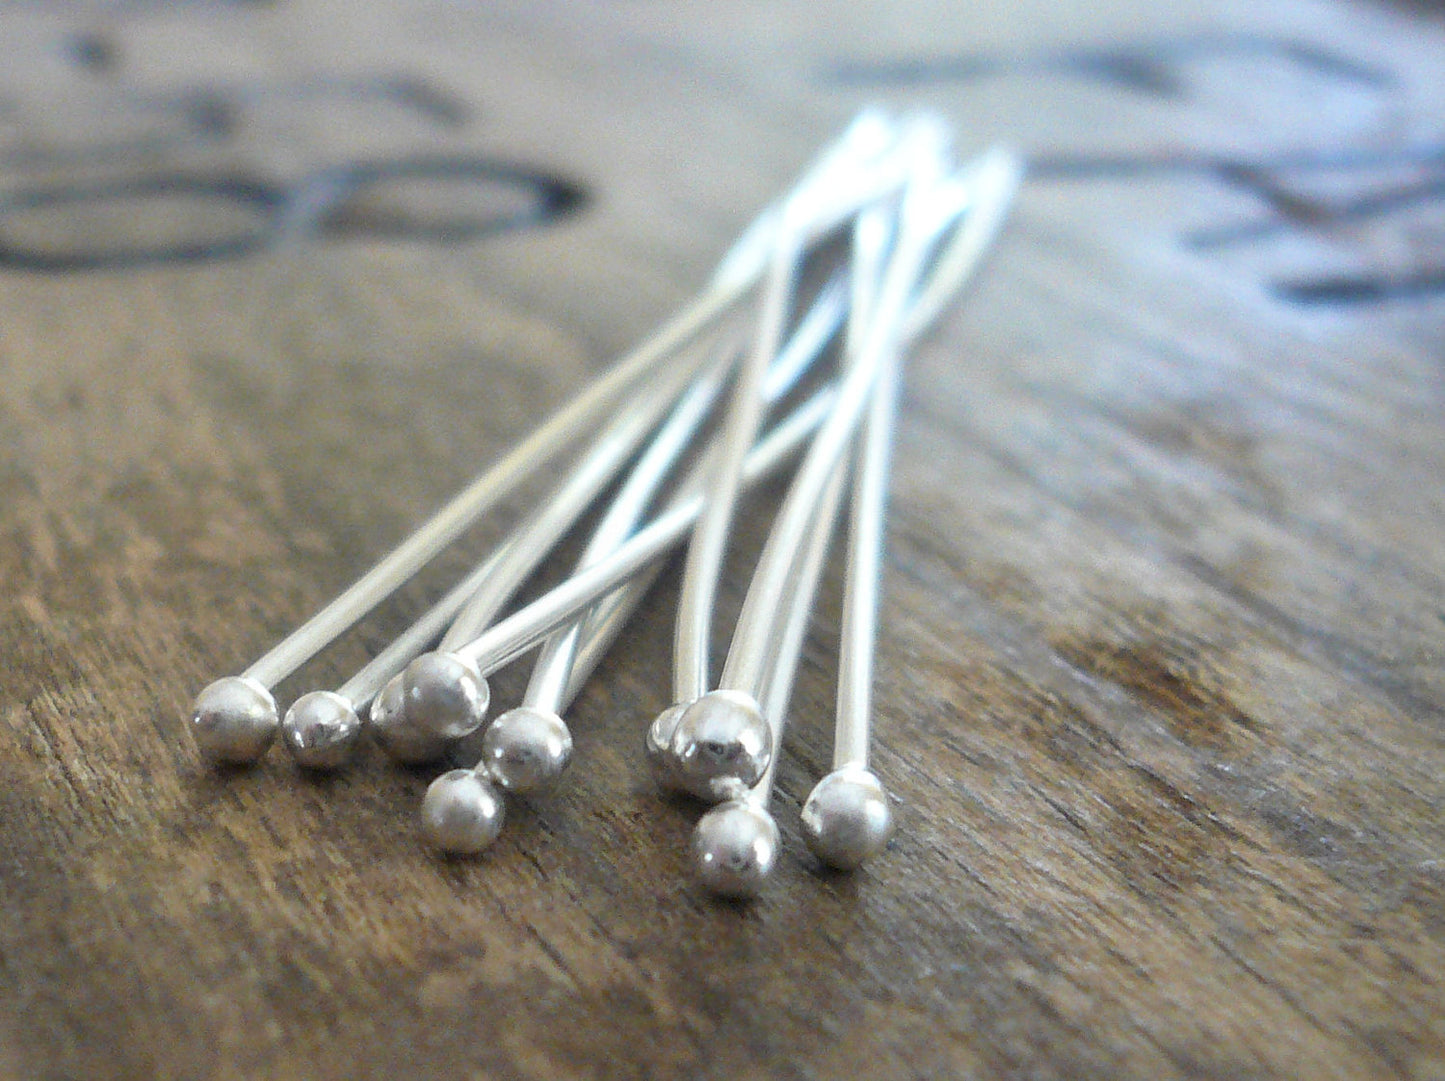 10 2" Fine Silver 26 GAUGE Handmade Ball Headpins - 2 inches. Oxidized and polished